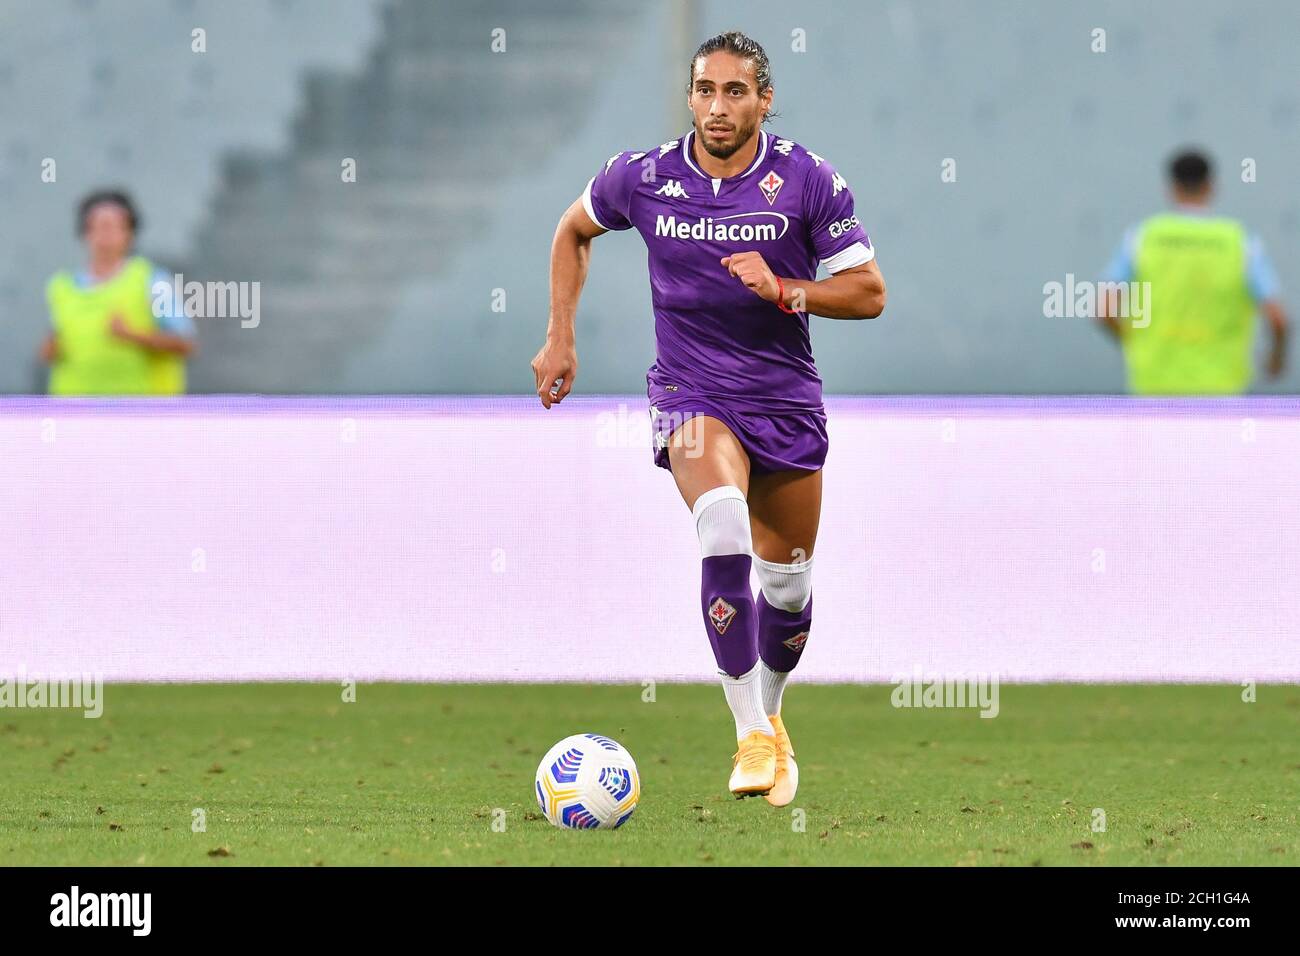 Florence, Italy. 12th Sep, 2020. Florence, Italy, 12 Sep 2020, Martin Caceres (Fiorentina) during Fiorentina vs Reggiana - Soccer Test Match - Credit: LM/Lisa Guglielmi Credit: Lisa Guglielmi/LPS/ZUMA Wire/Alamy Live News Stock Photo